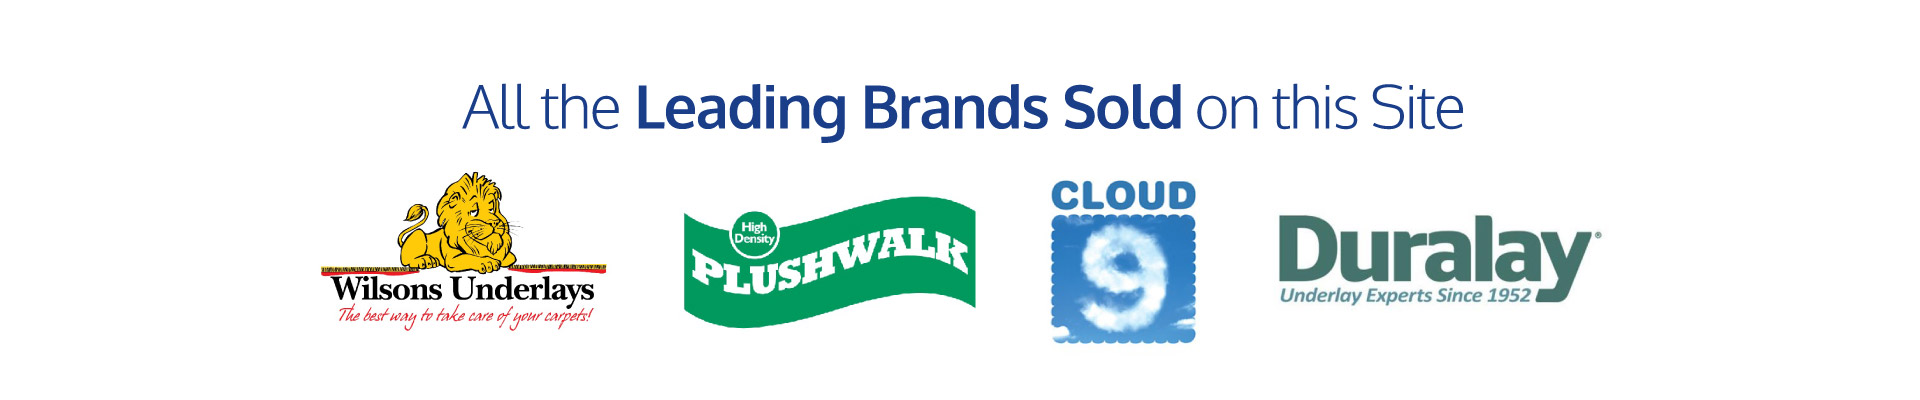 Leading Brands Sold on site banner